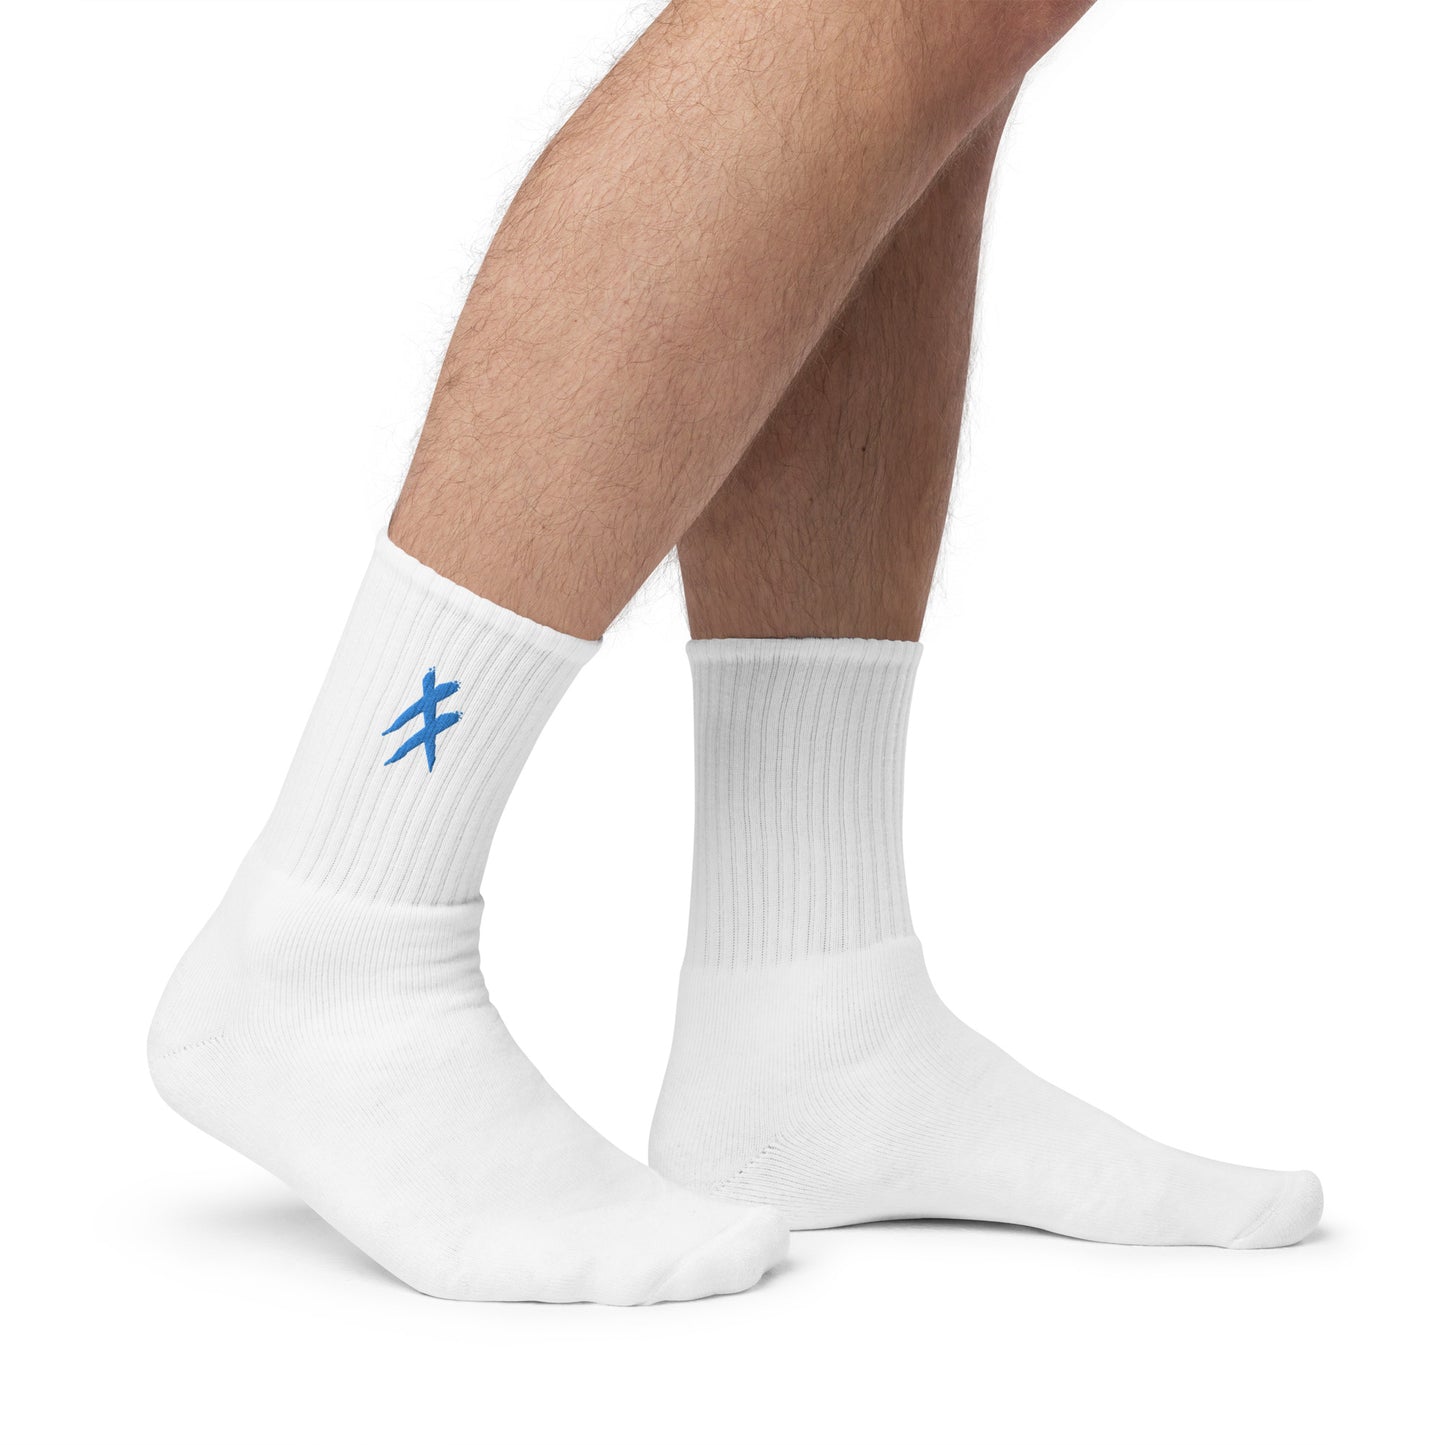 Blue X's - Embroidered socks